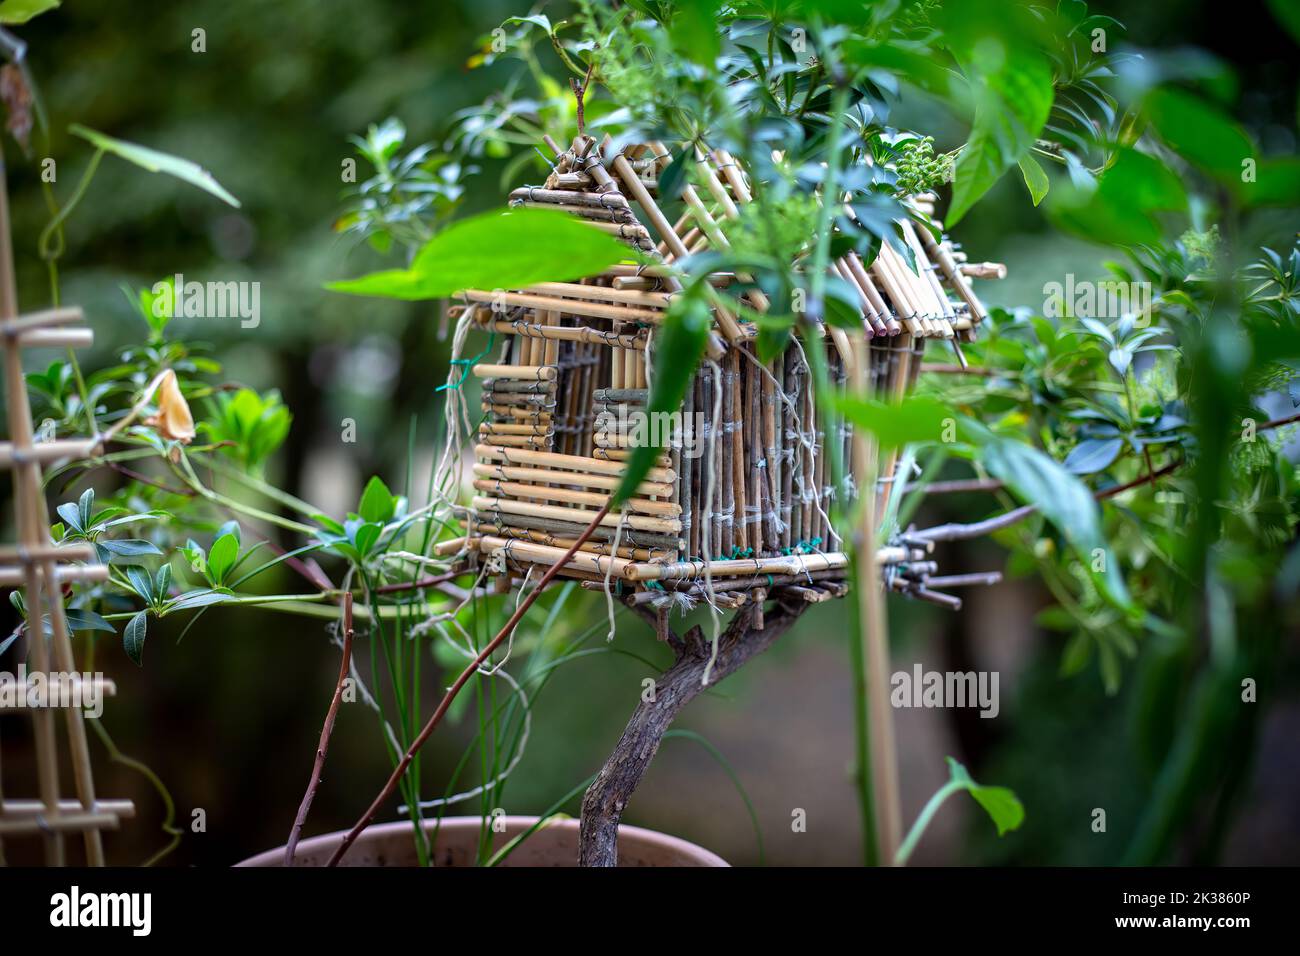 close-up of flower pot and birdhouse on balcony Stock Photo